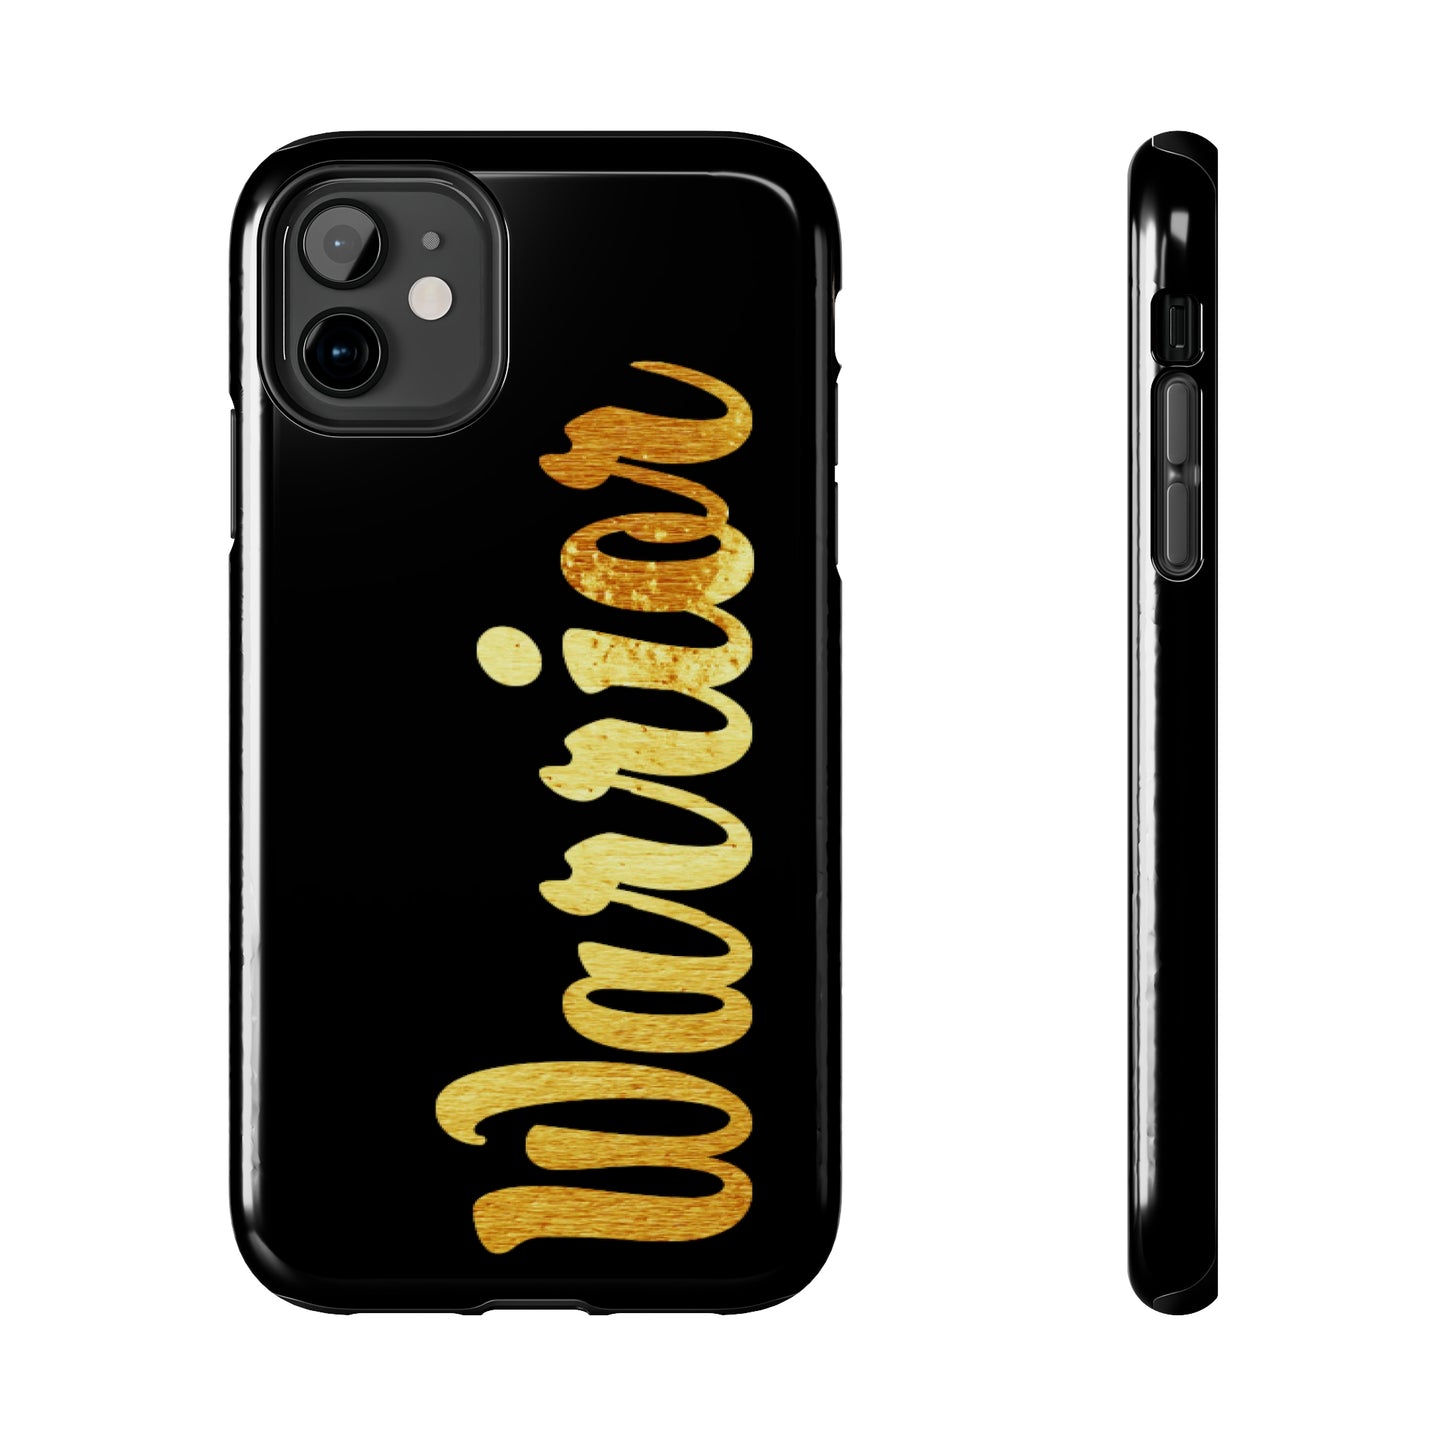 Gold and Bold Warrior - Tough Phone Cases